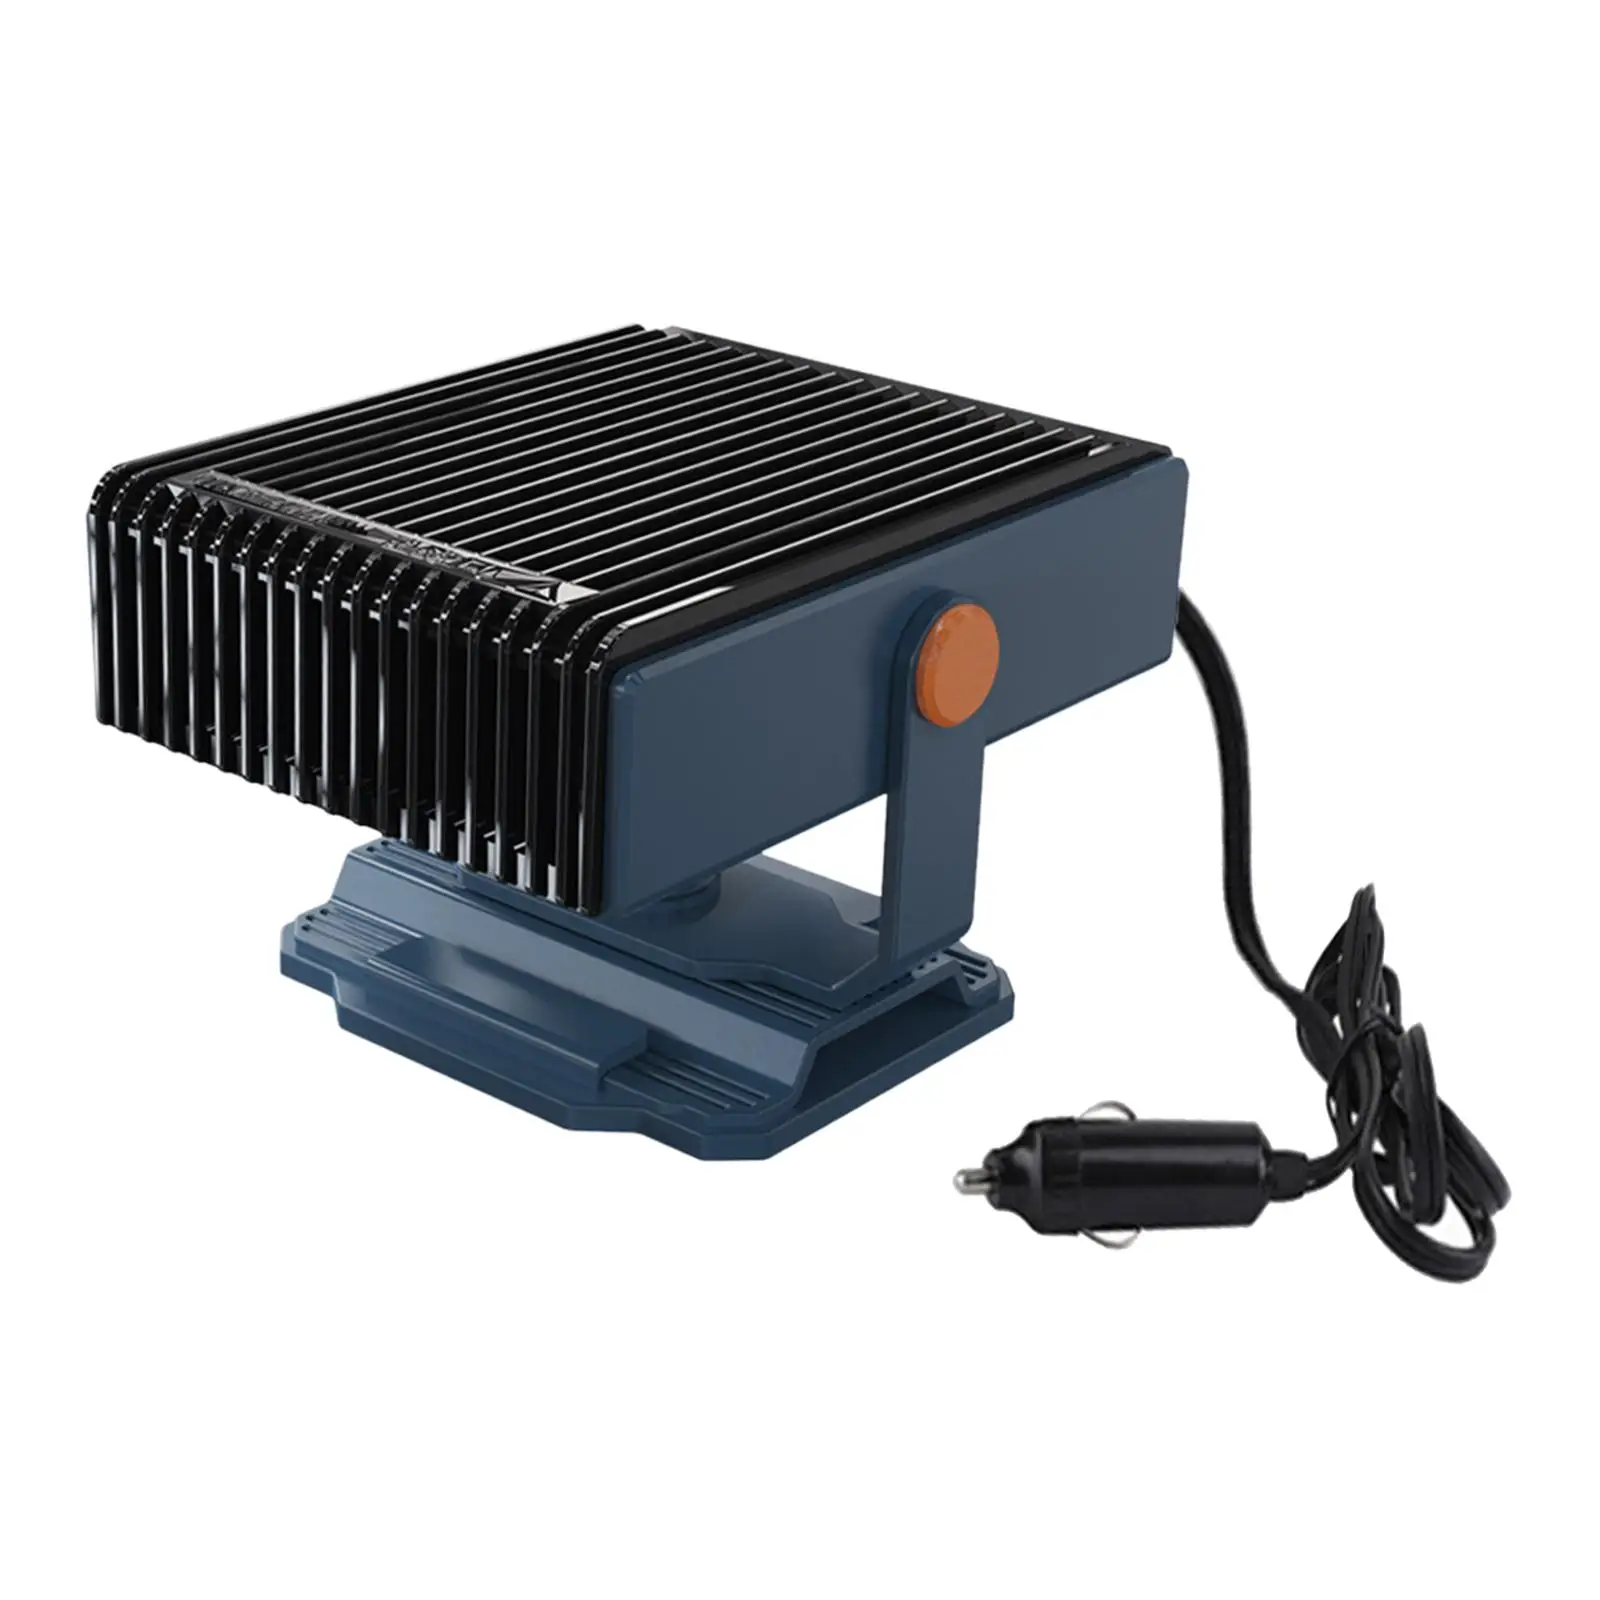 Car Heater Quick Heating Protable Defrost Defogger 12V 150W Multifunction Auto Heater Fan for Car RV Vehicles Boat Truck